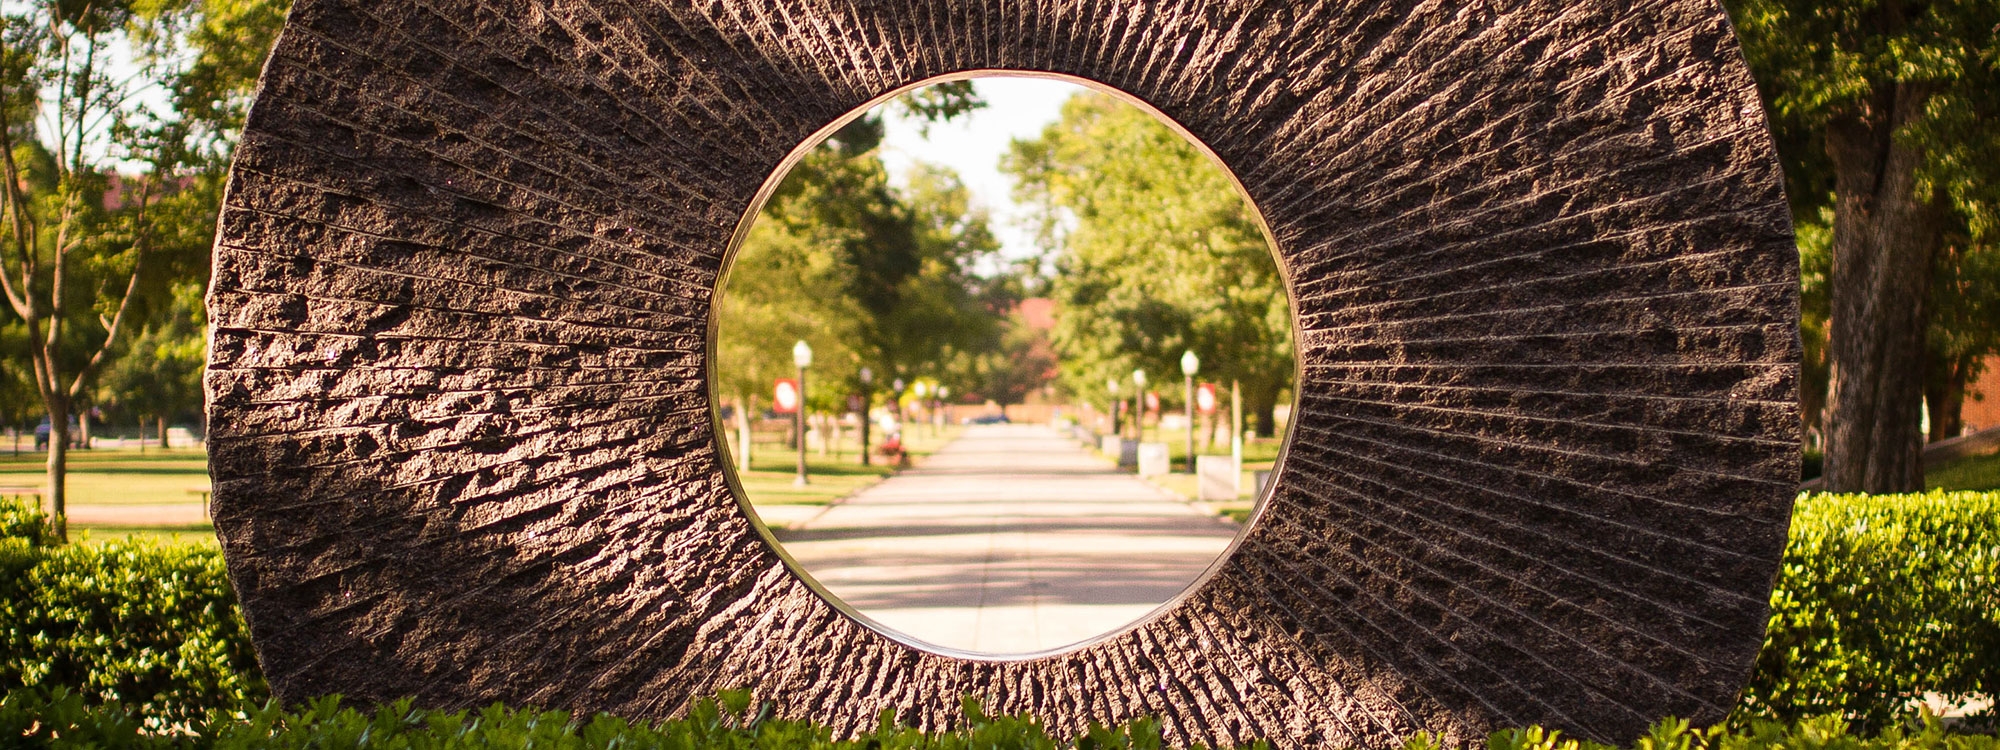 A circular stone sculpture with trees and the North Oval of campus visible through the circle.